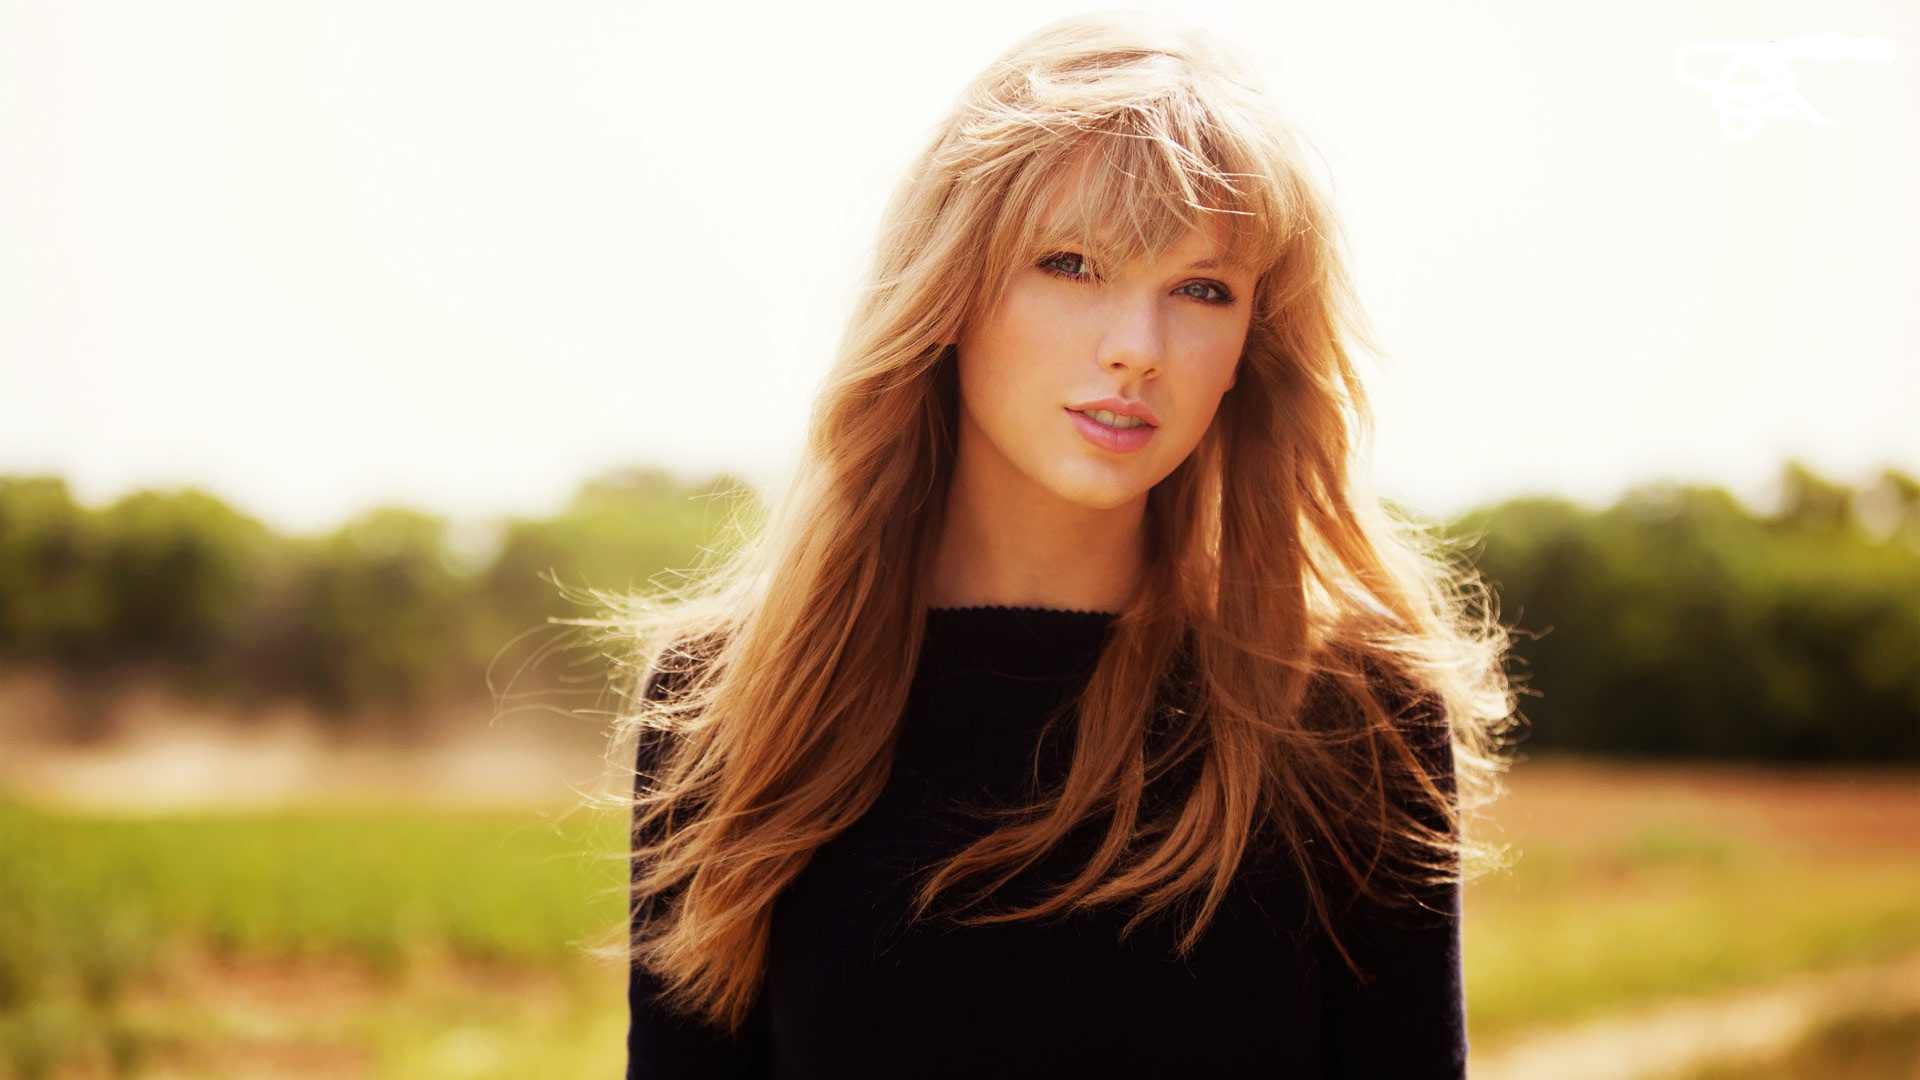 Taylor Swift 2013 HD Wallpaper Android Wallpapers 2016